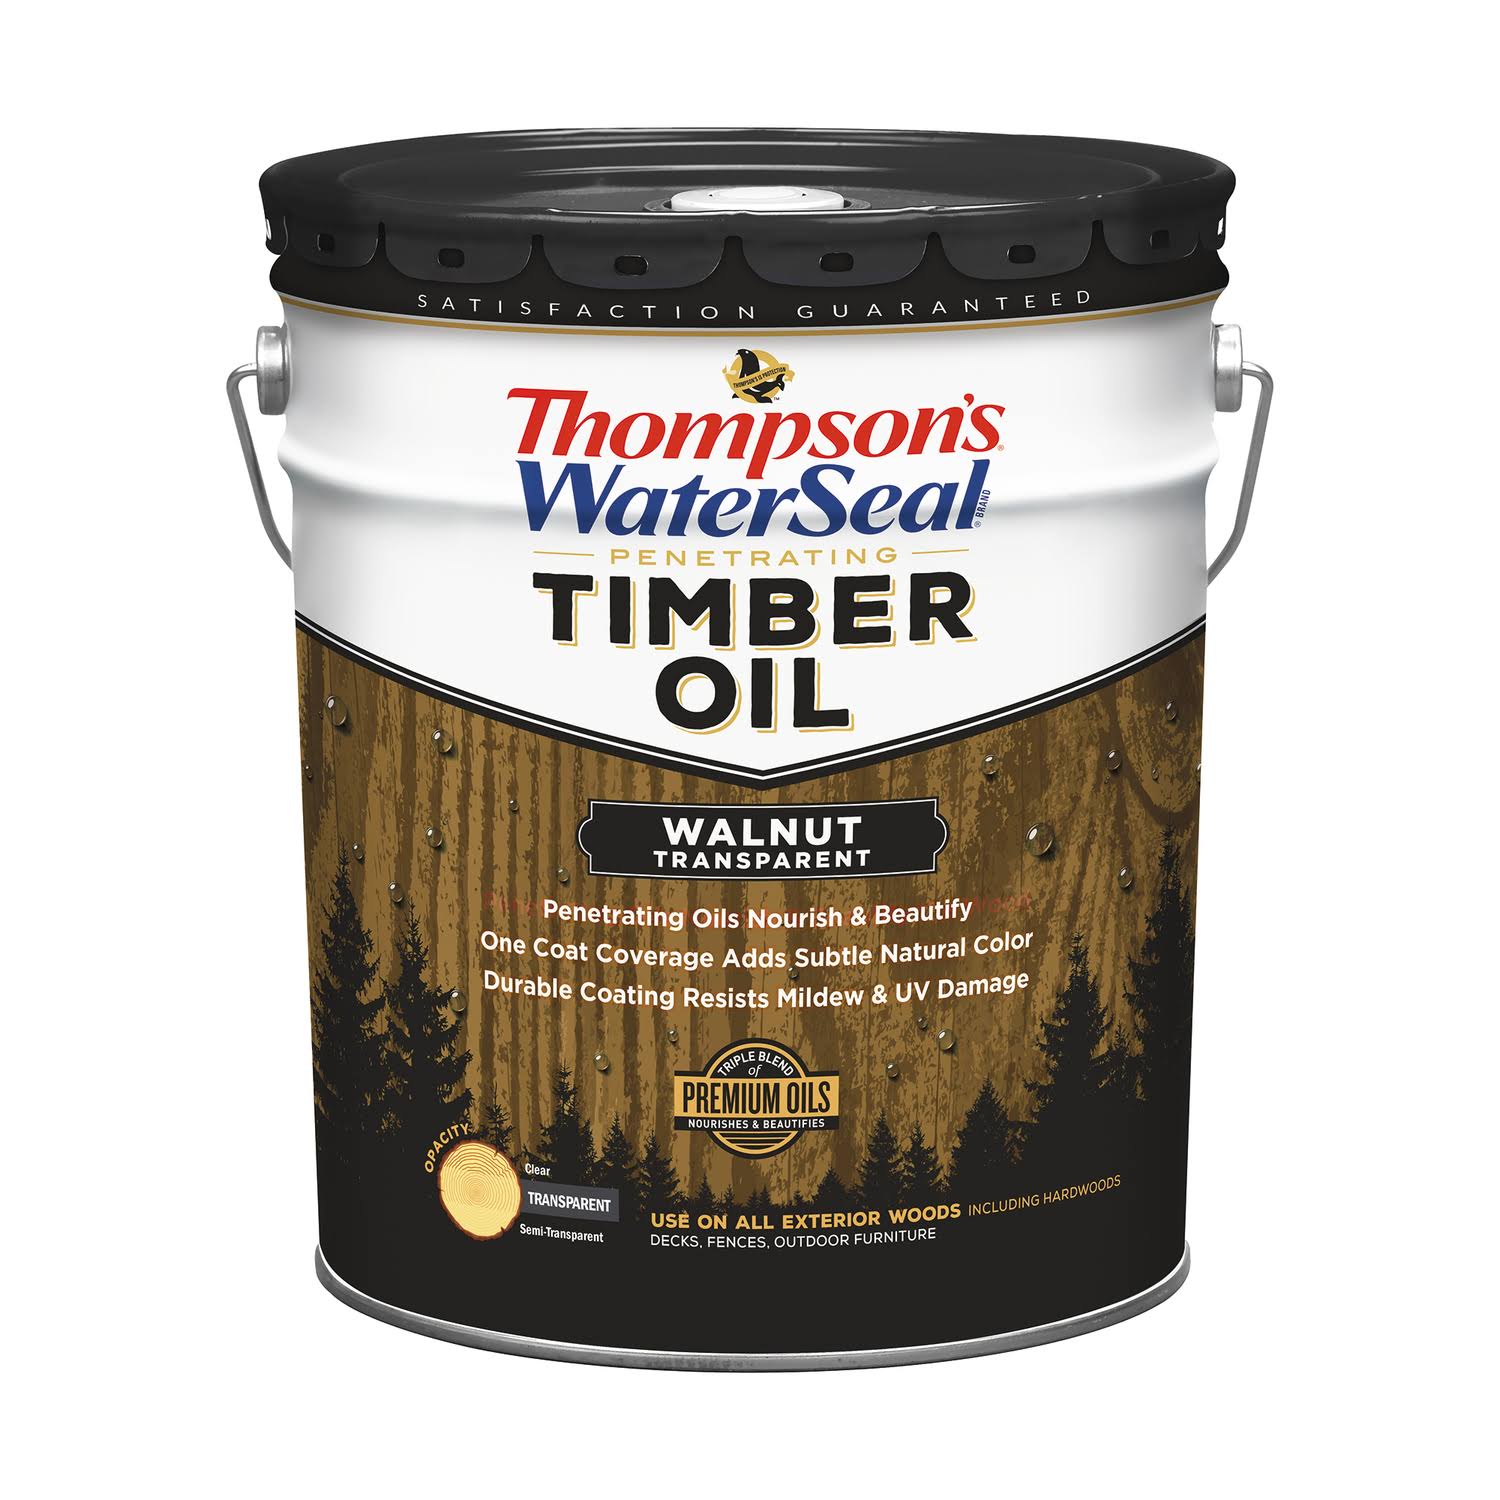 Thompsons Waterseal 1895143 Penetrating Timber Oil - Walnut Transparent, 5gal